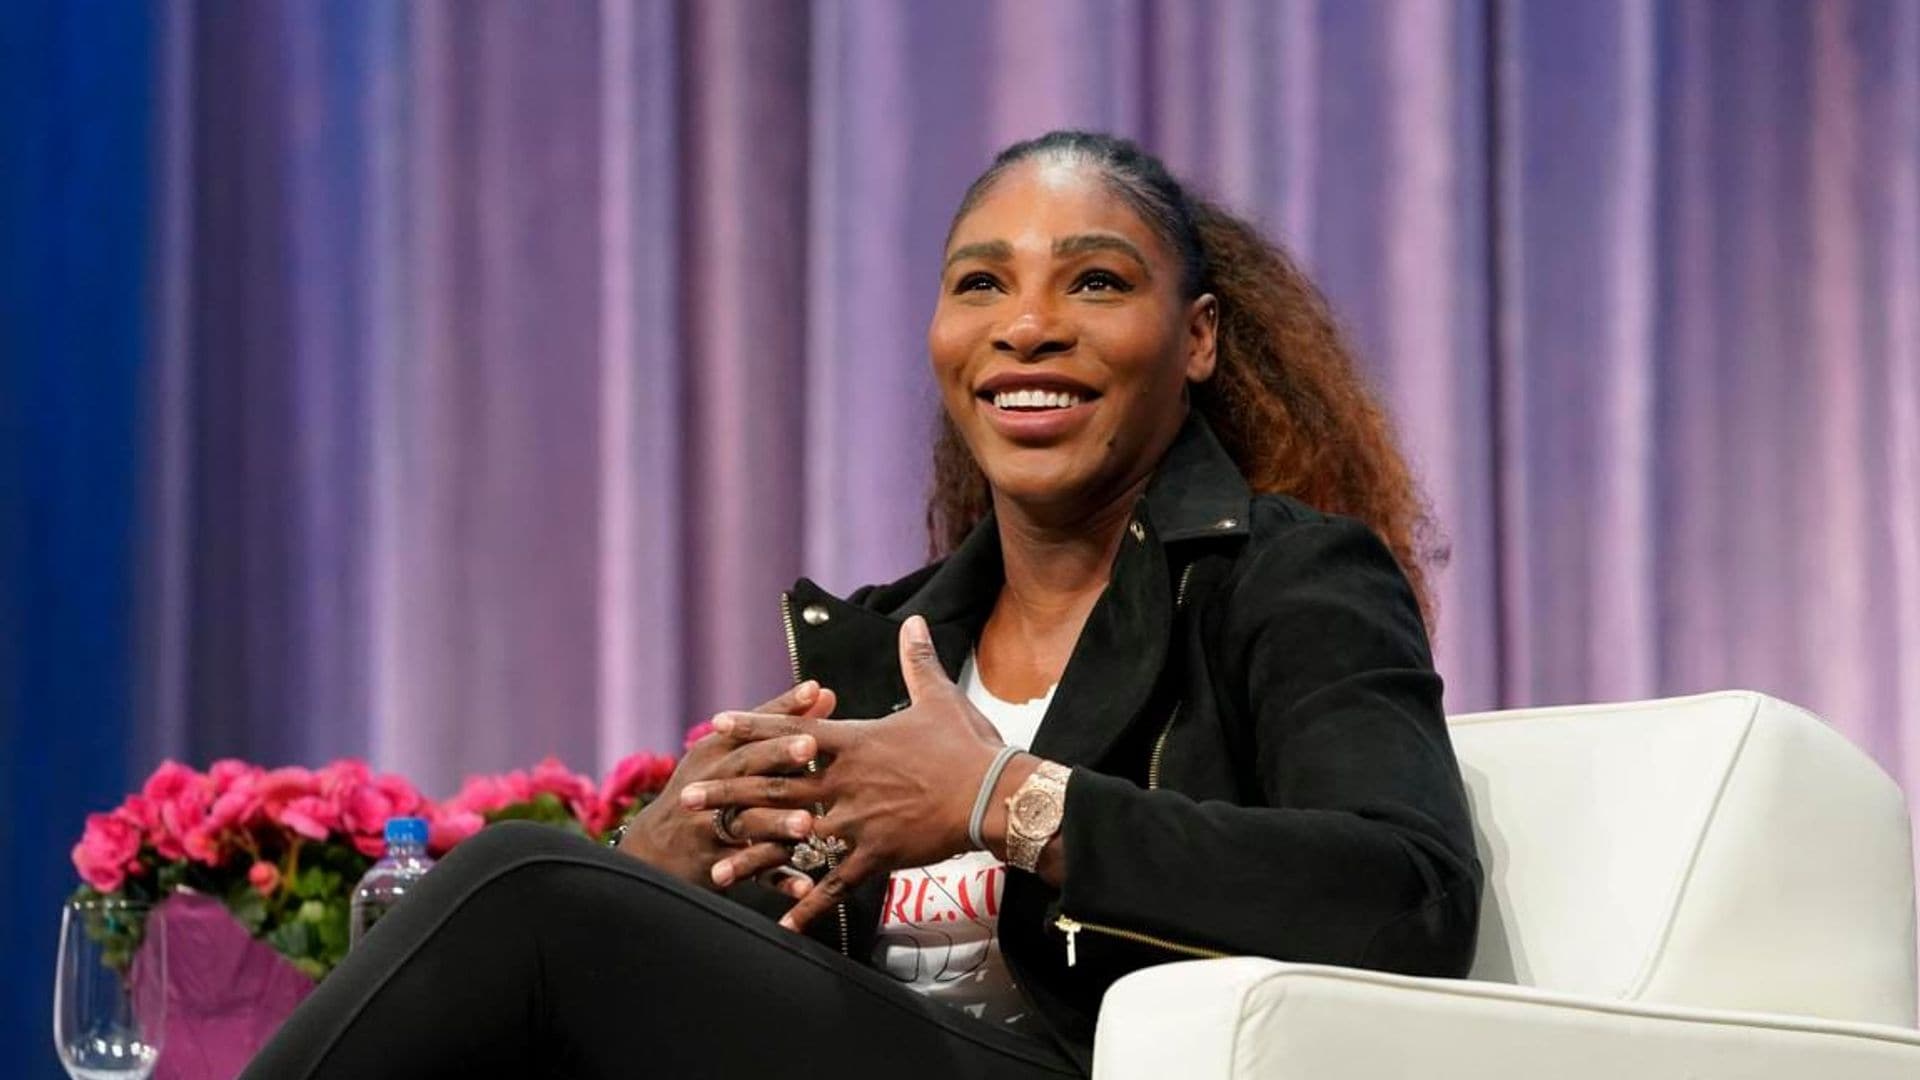 Serena Williams clothing line new prints and patterns are to die for